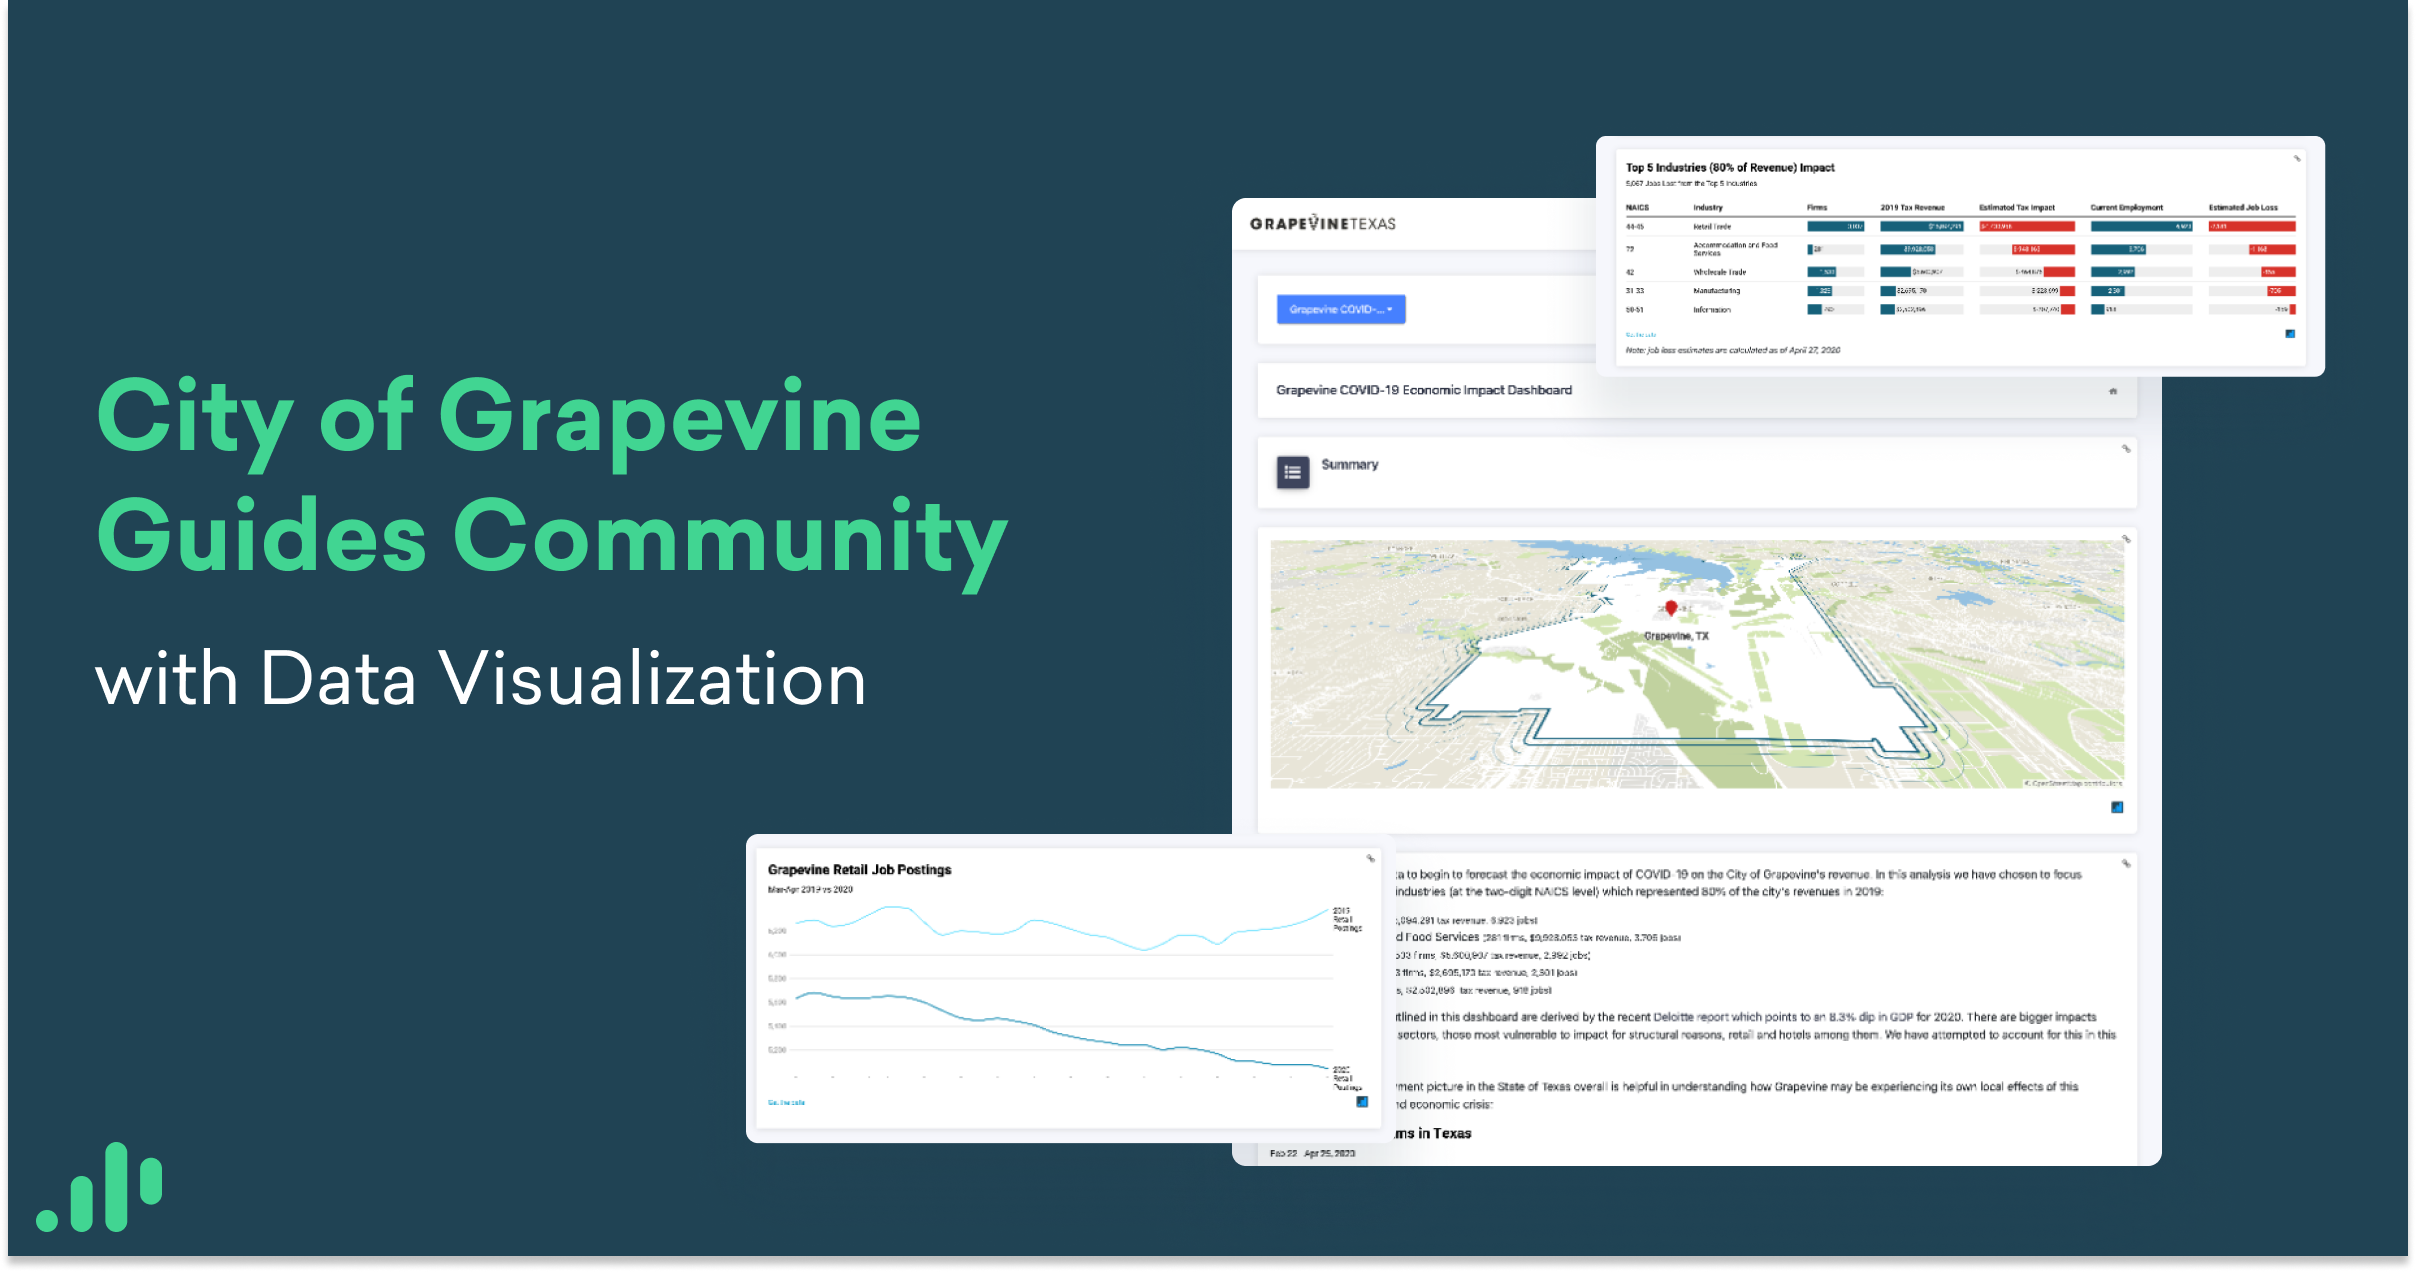 City of Grapevine Guides Community with Data Visualization